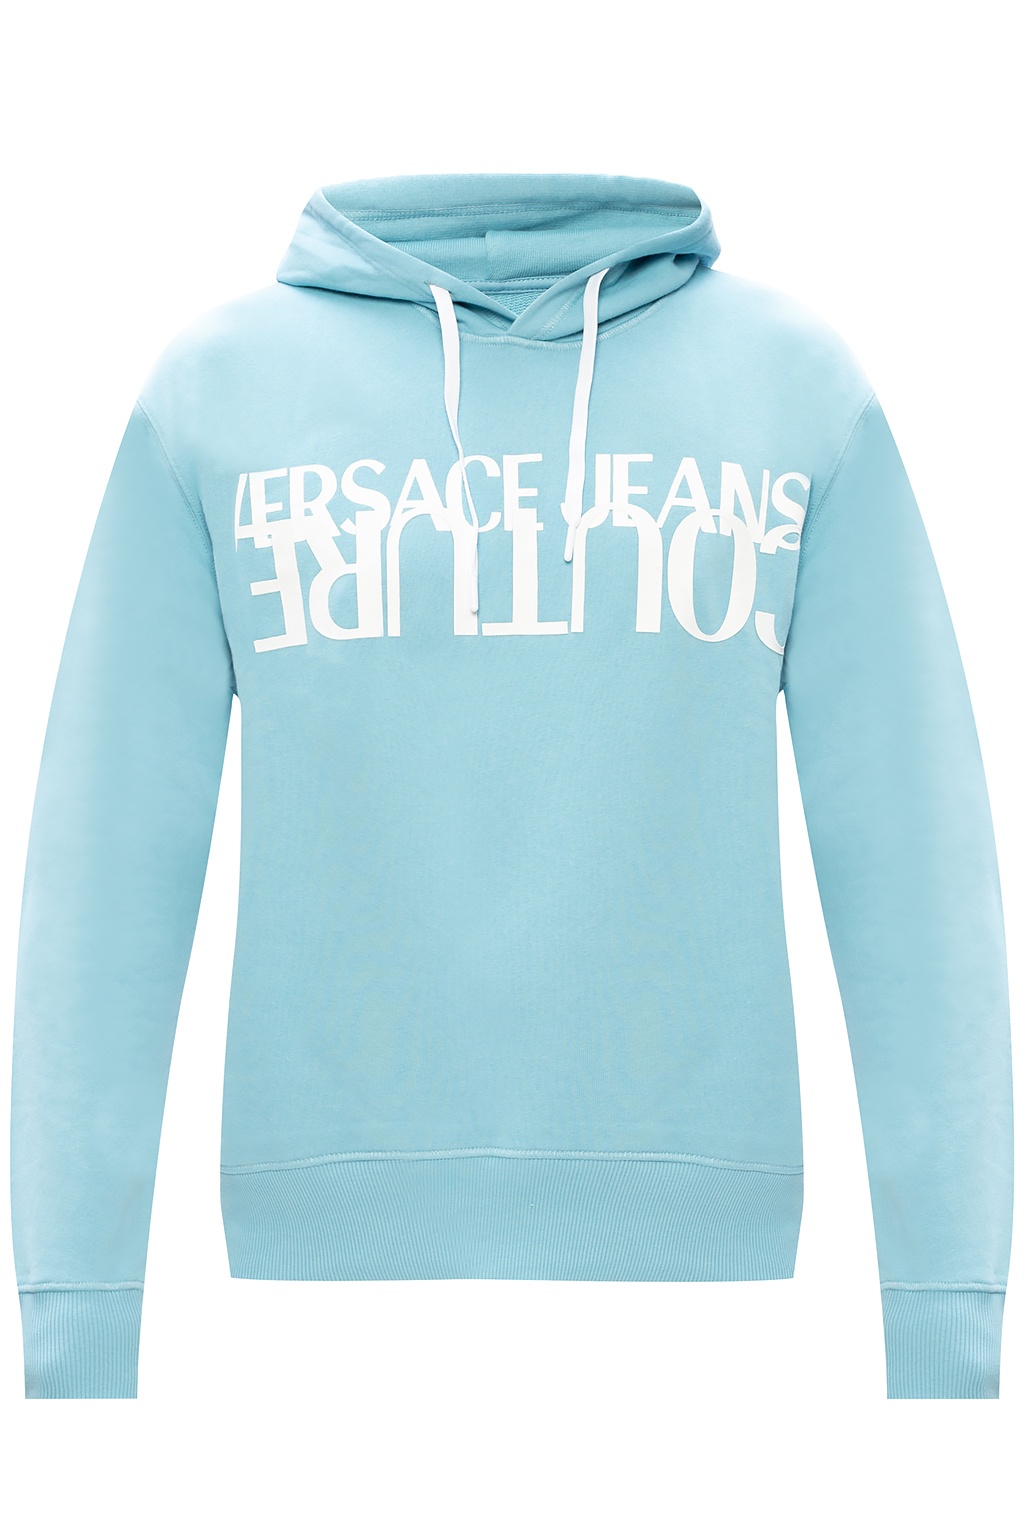 versace jeans canada